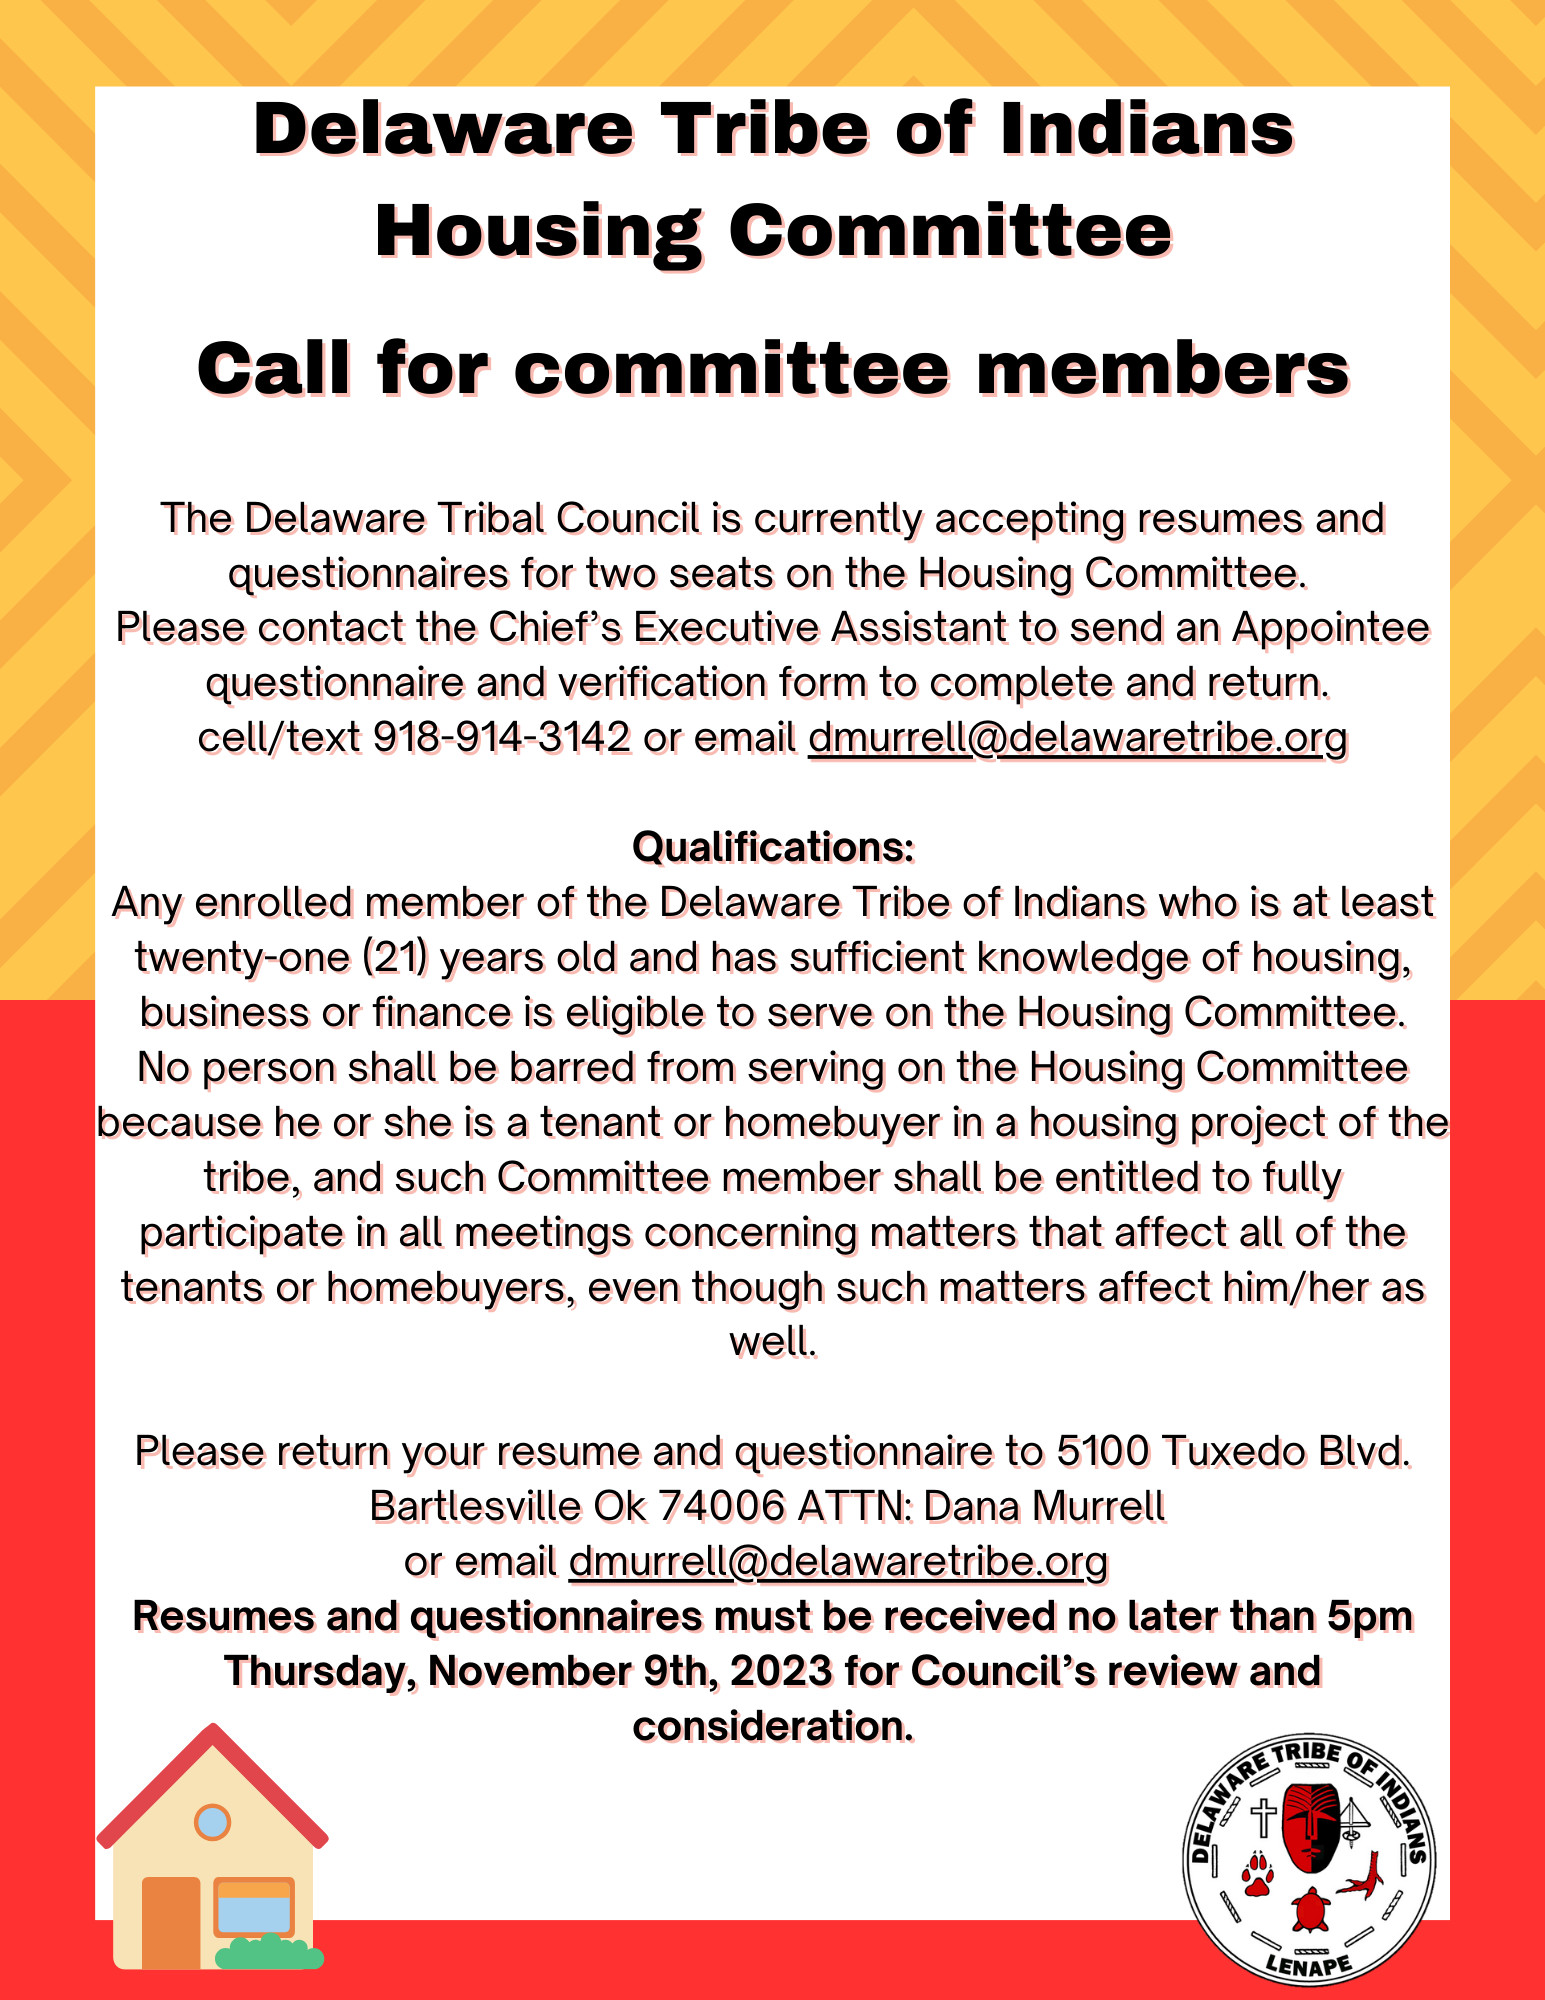 The Delaware Tribal Council is currently accepting resumes and questionnaires for two seats on the Housing Committee. Please contact the Chief's Executive Assistant by email at dmurrell@delawaretribe.org or by phone/text at (918) 914-3142 to to complete and return an Appointee questionnaire and verification form.